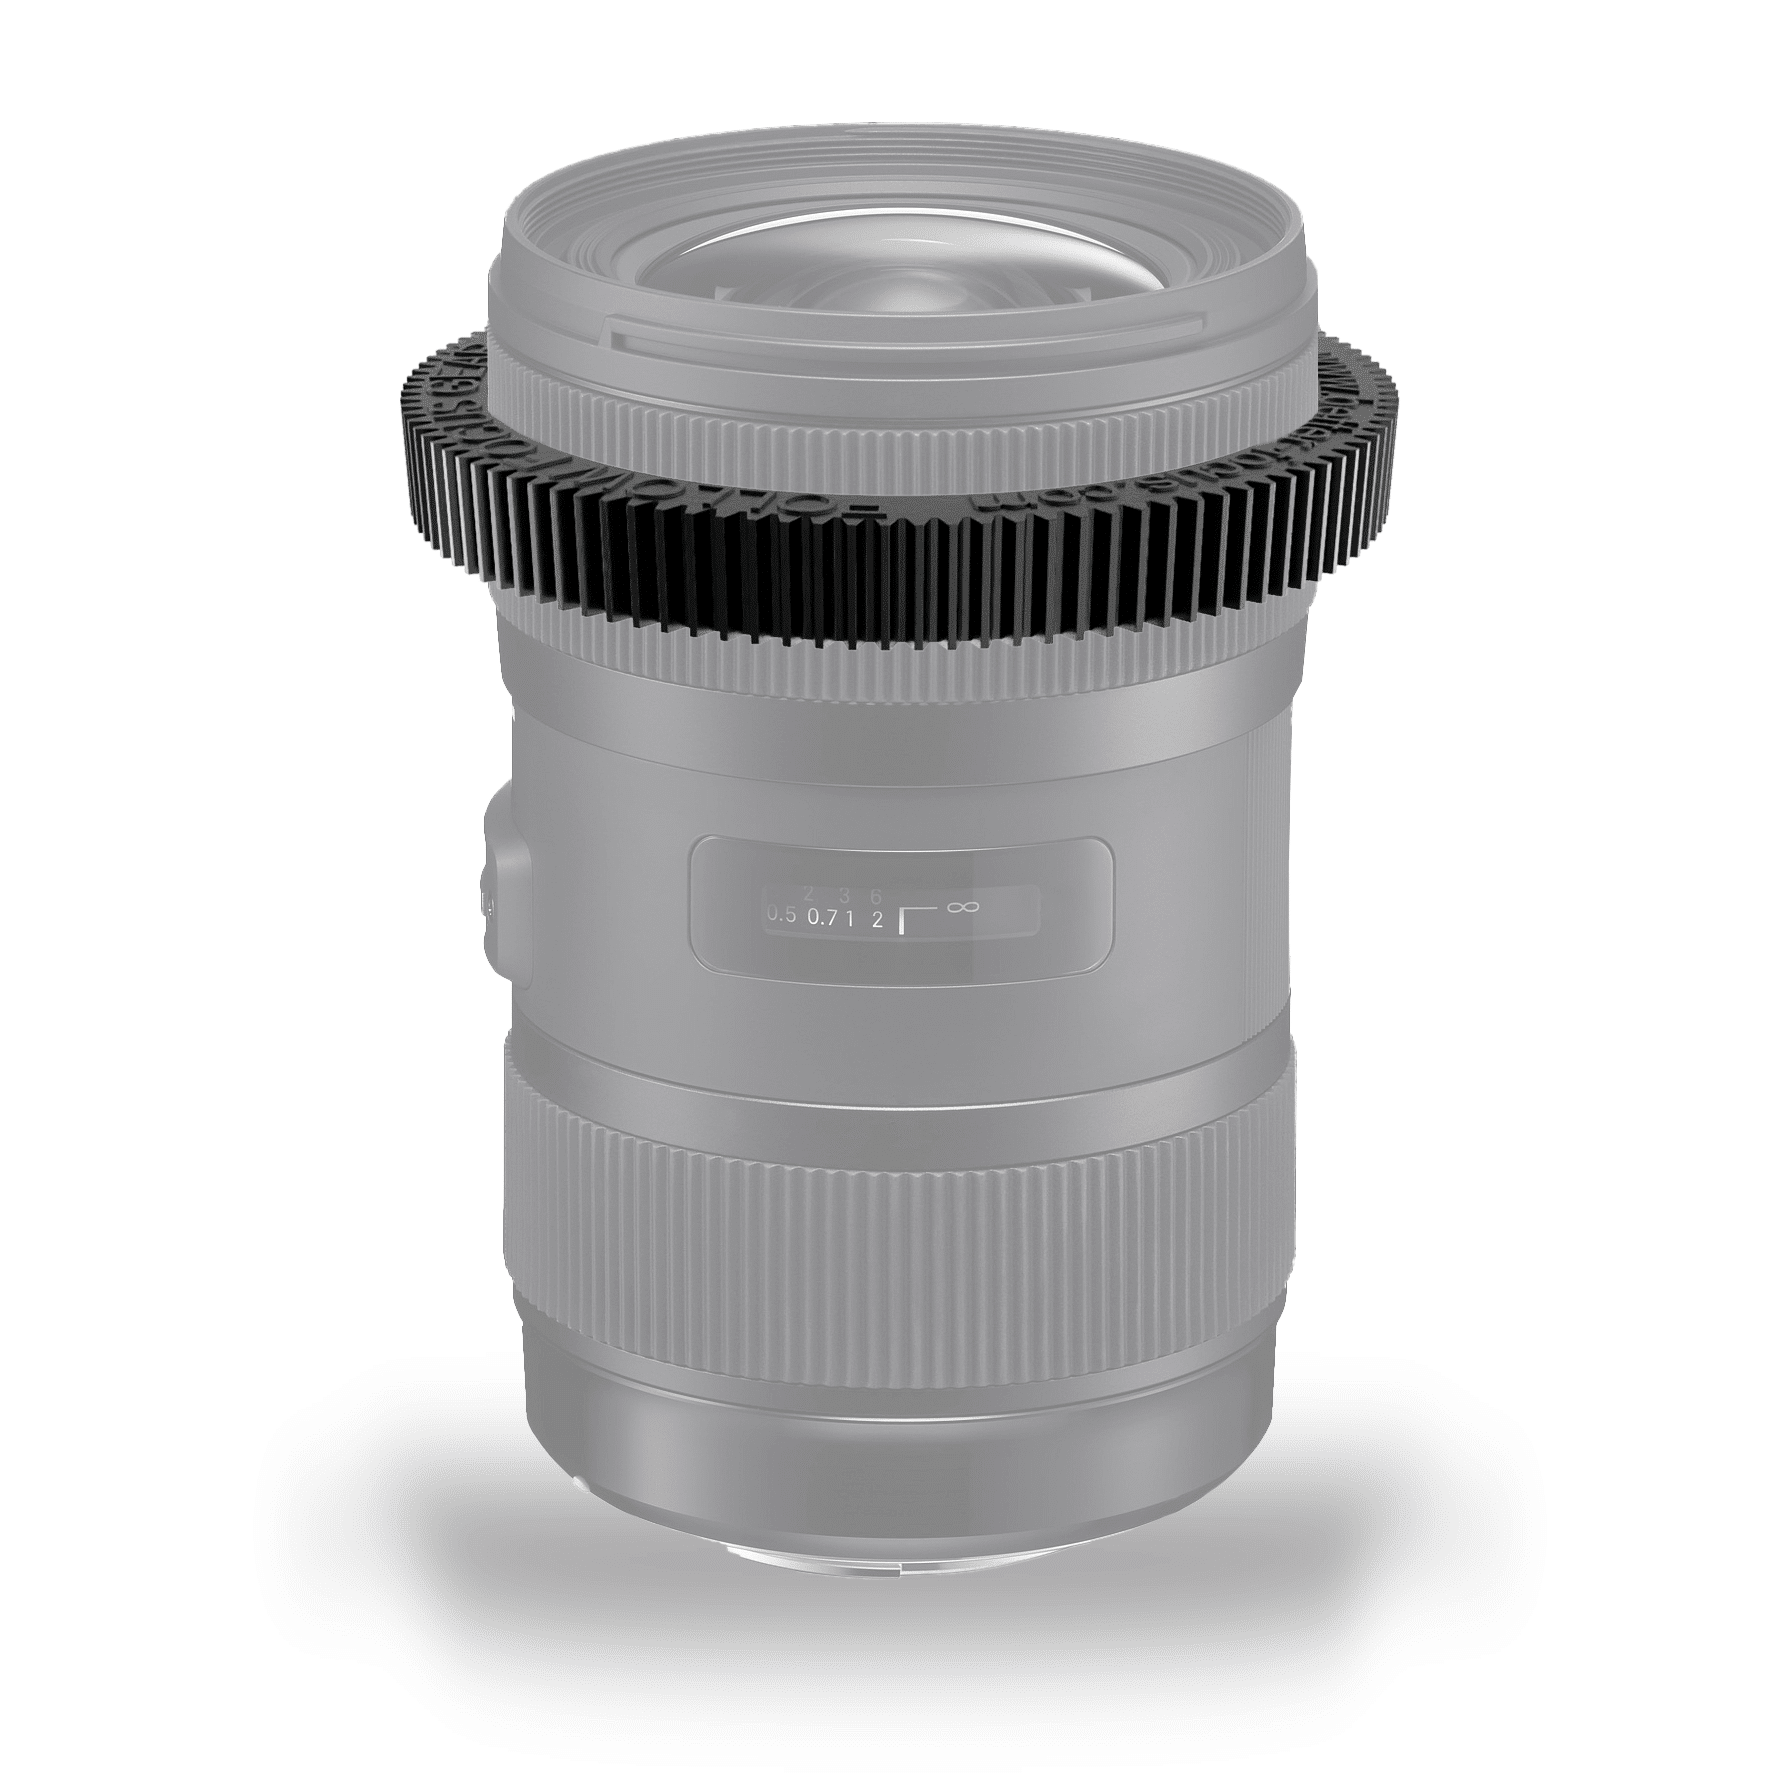 Follow Focus Gear for Canon RF 10-20mm F/4L IS STM lens